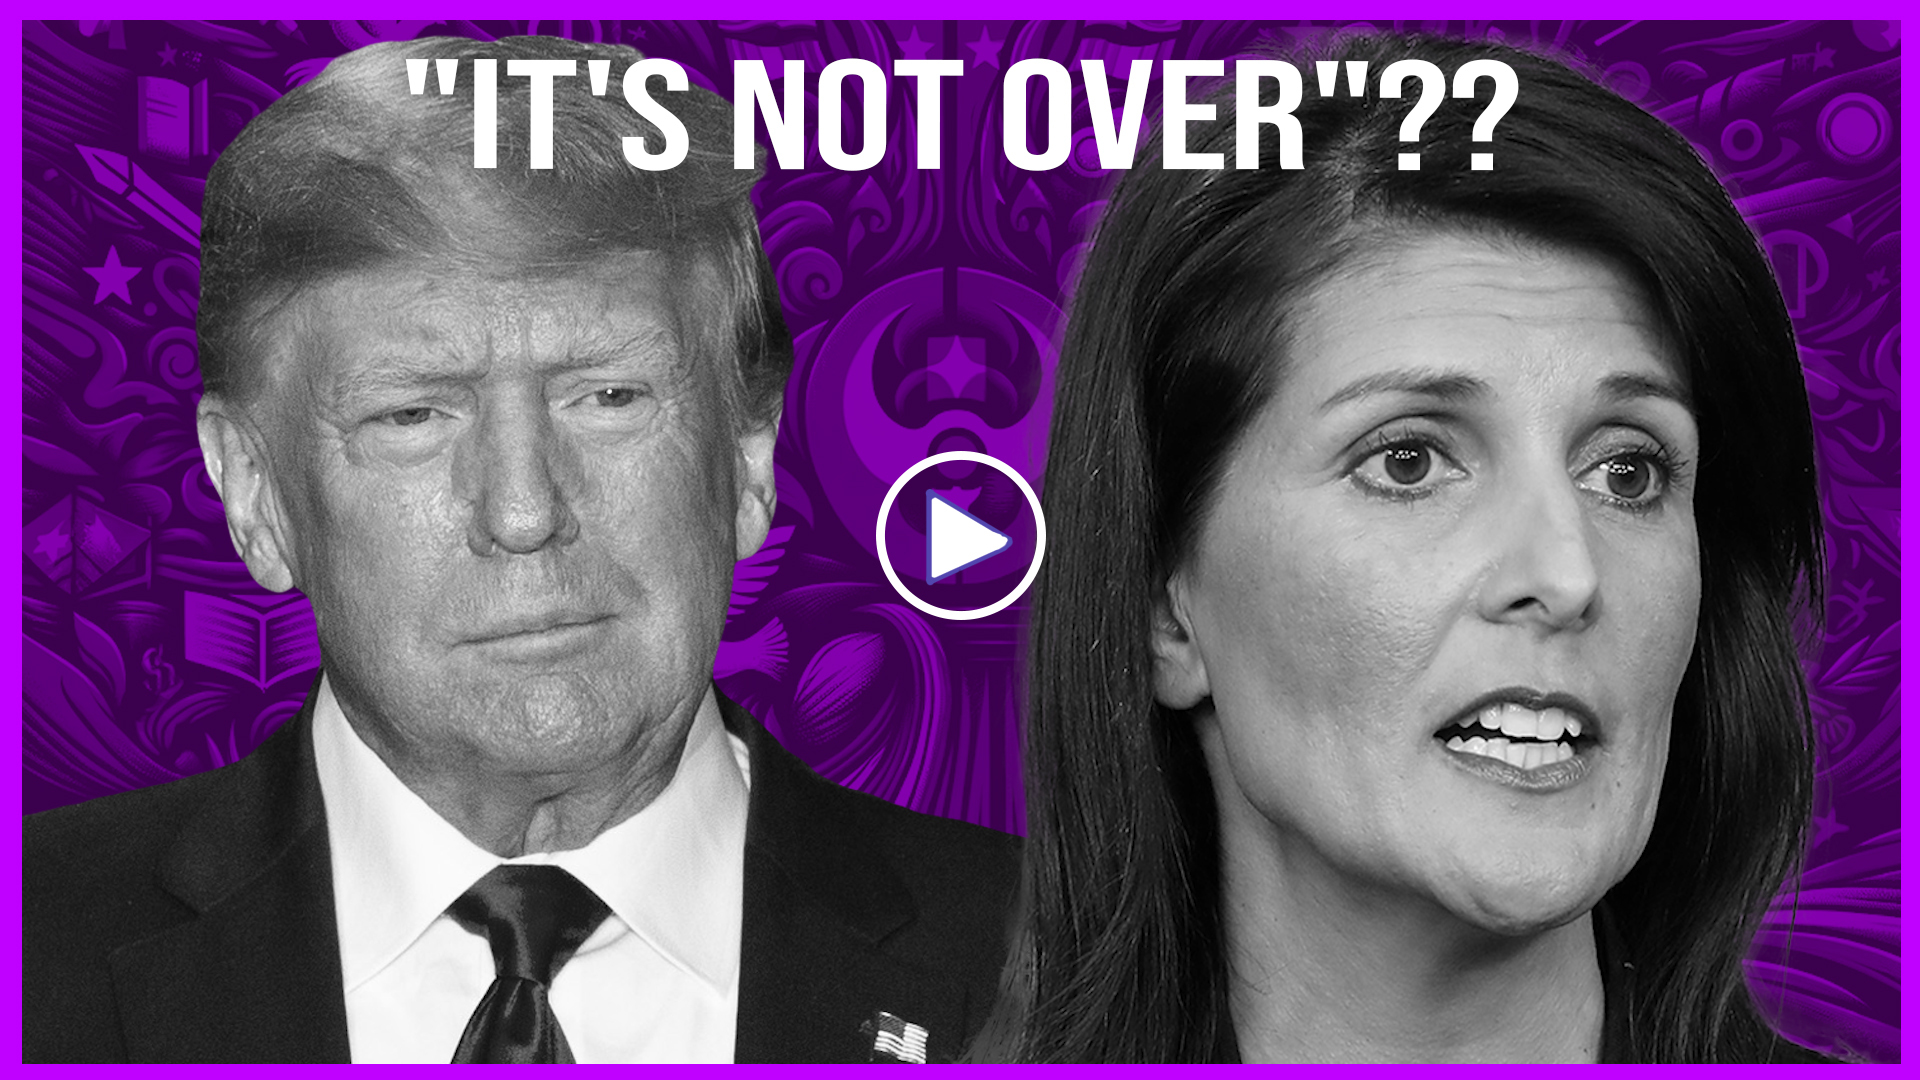 "It's Not Over"?? #trump #nikkihaley #primary #candidate #2024elections #republican #party #politics